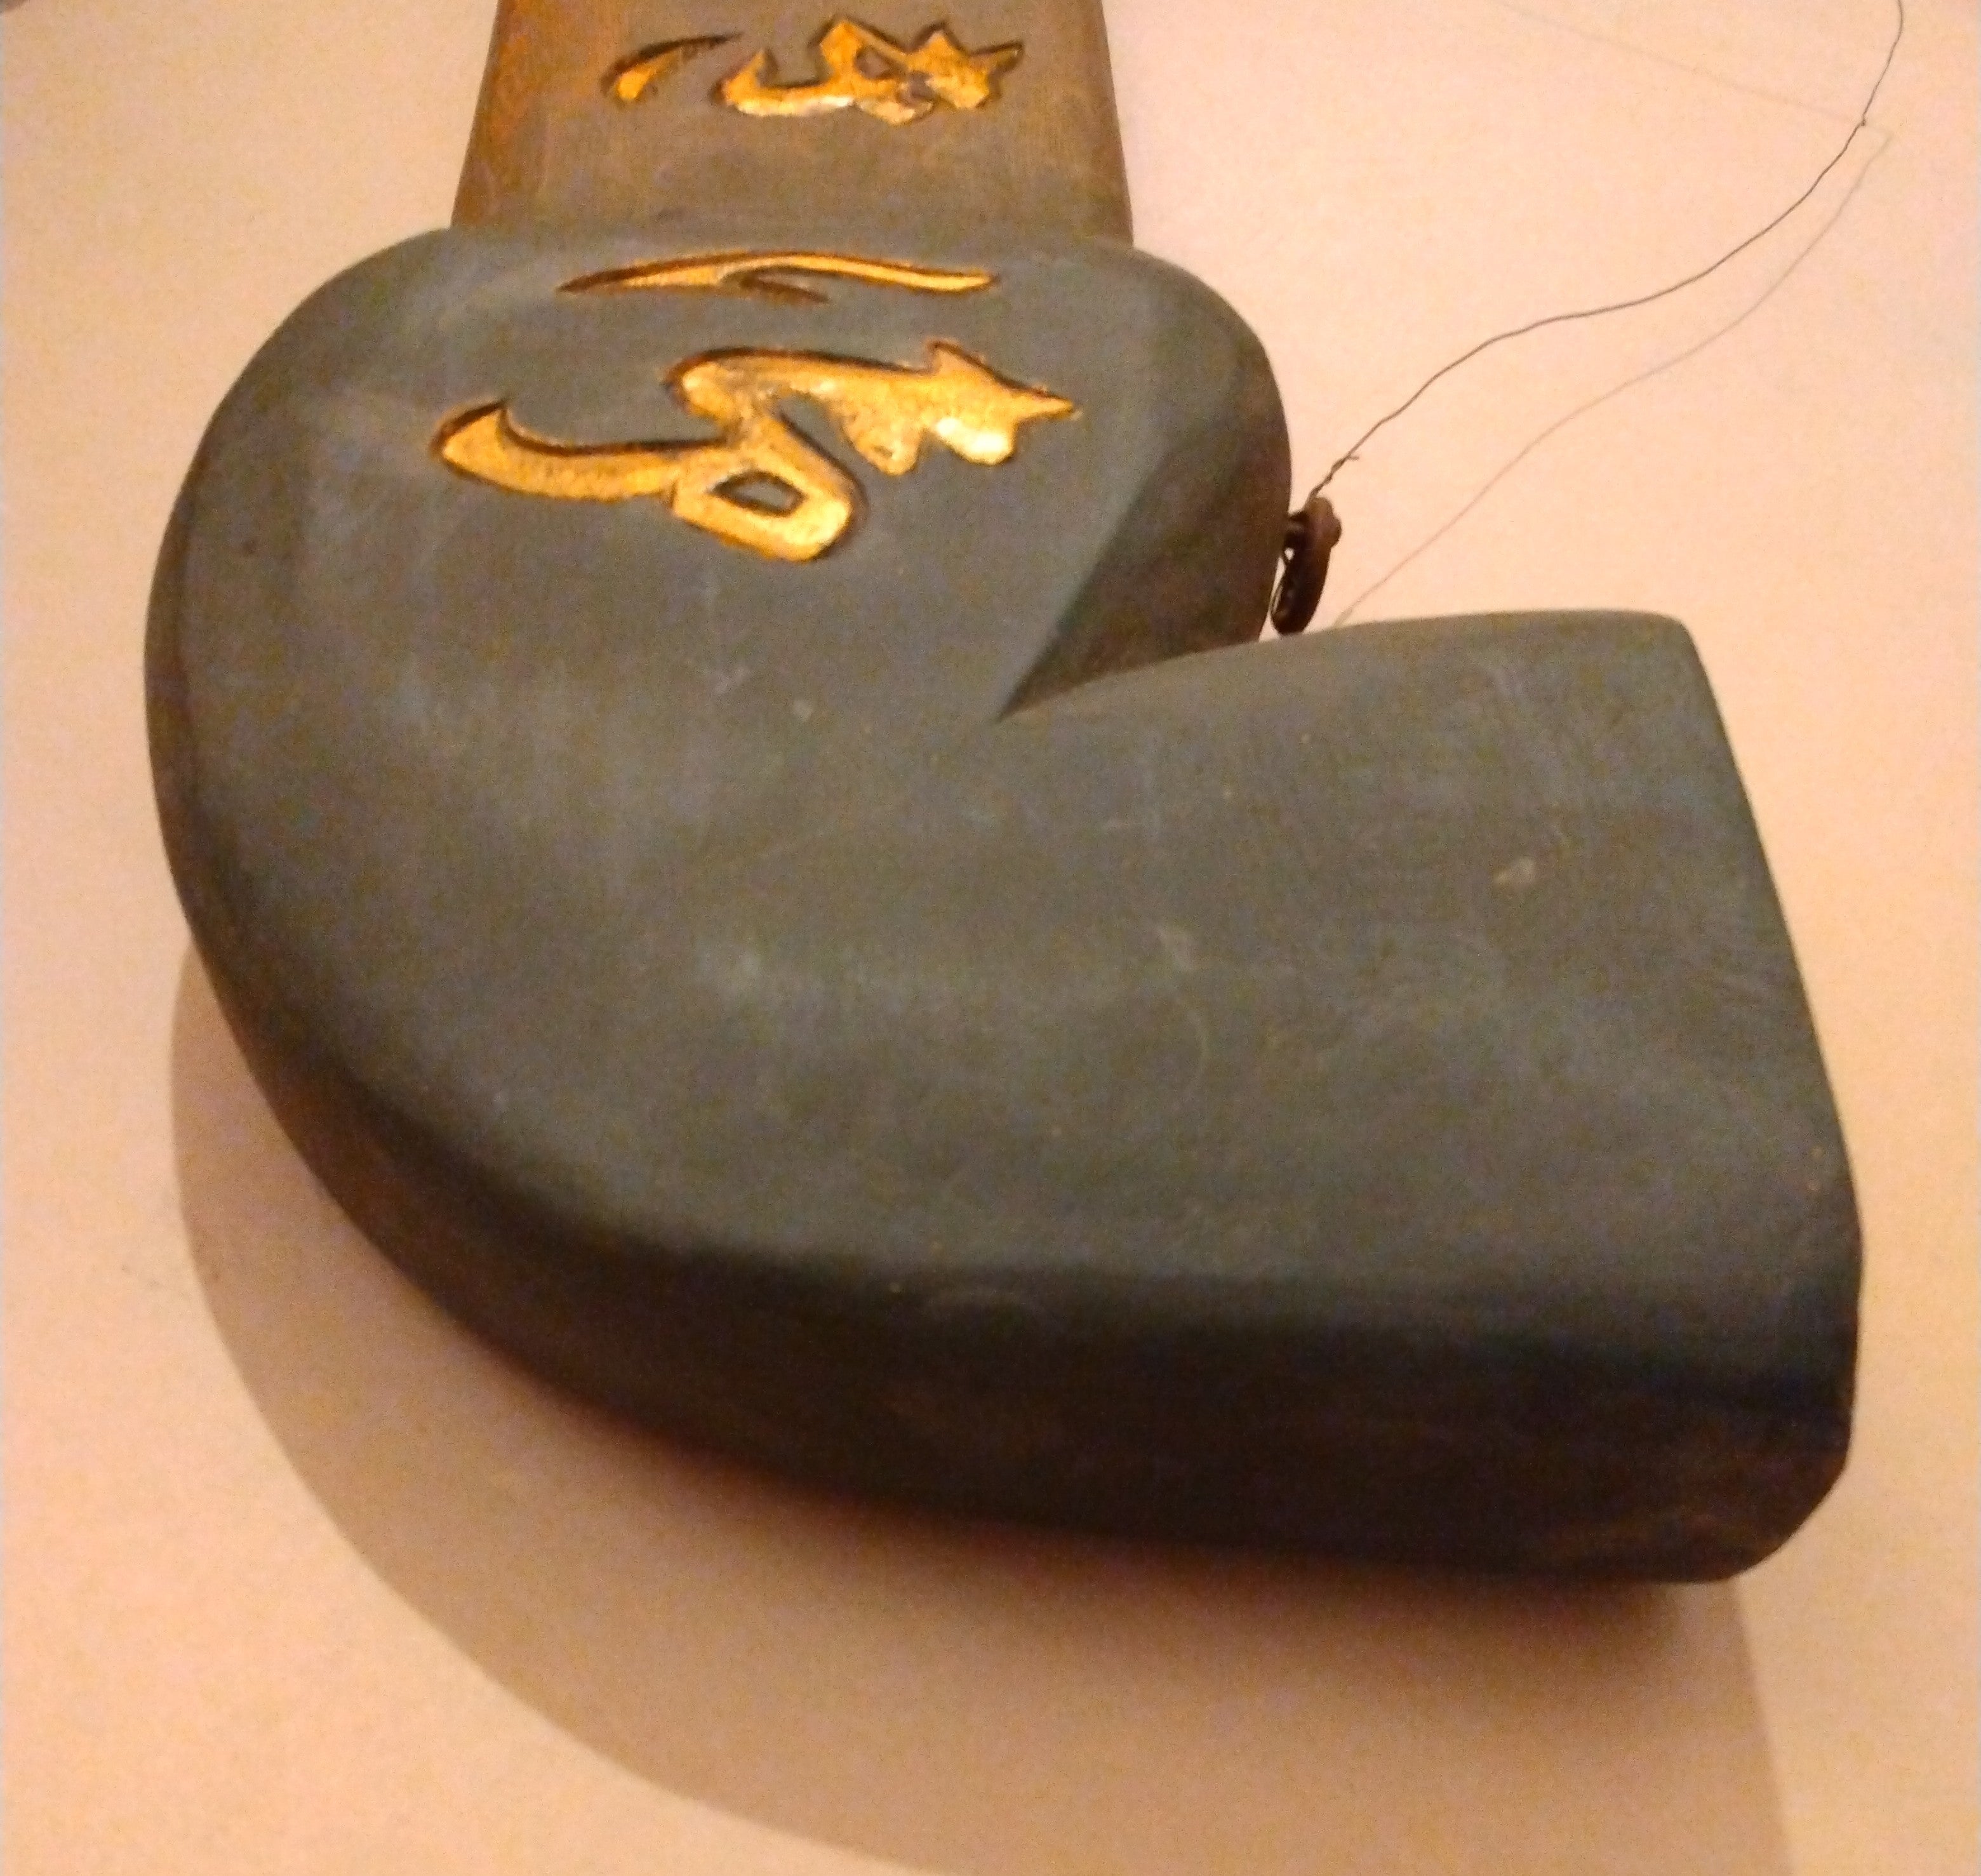 Kanban, Shop Sign, in the shape of a Tobacco Pipe; Thiel Collection